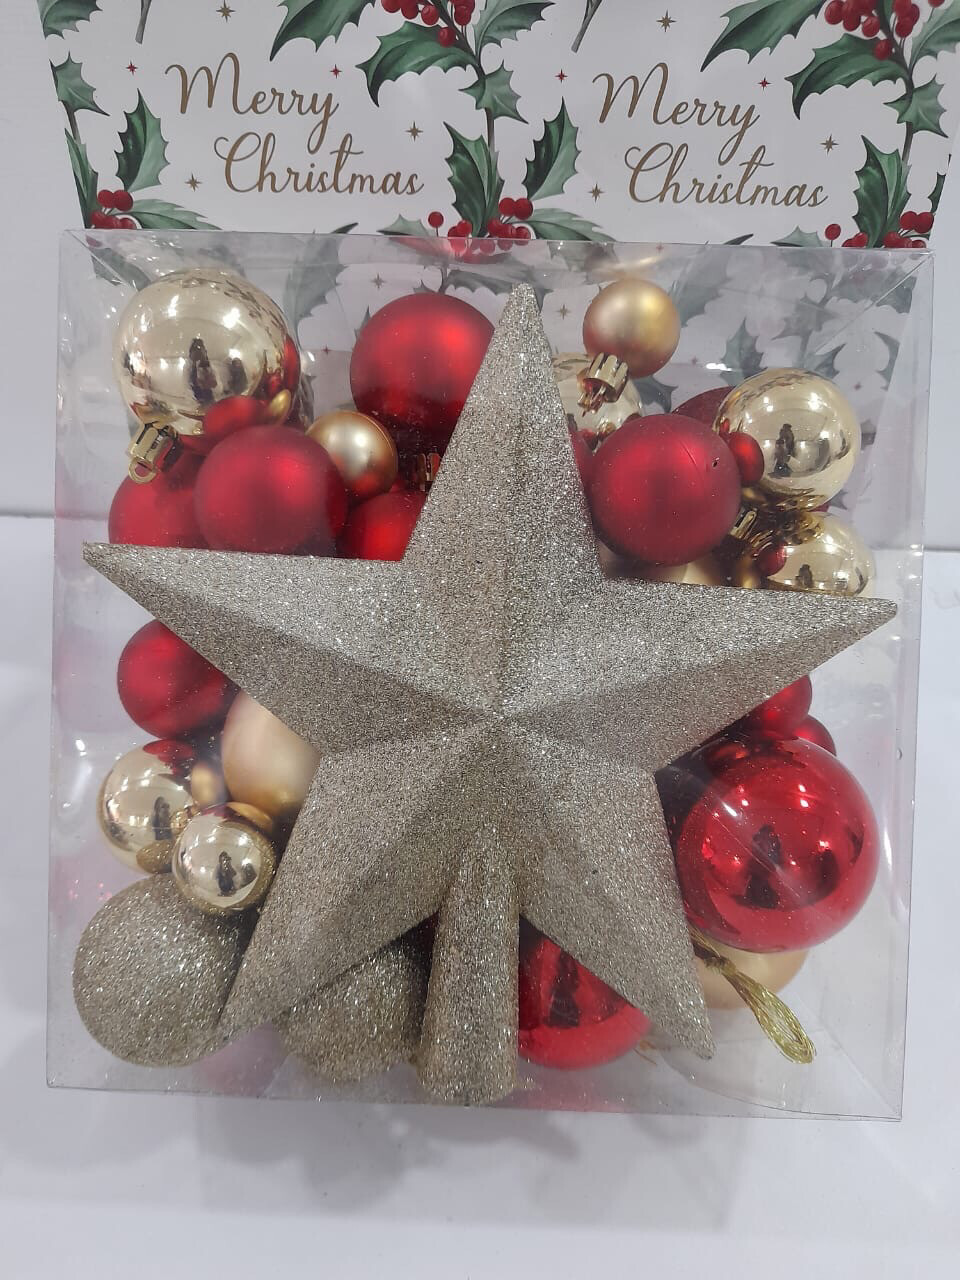 Christmas Decoration Set - 48pcs Mixed Size Balls in Gold and Red Plus 1 Star (Model SYQA-0122307)